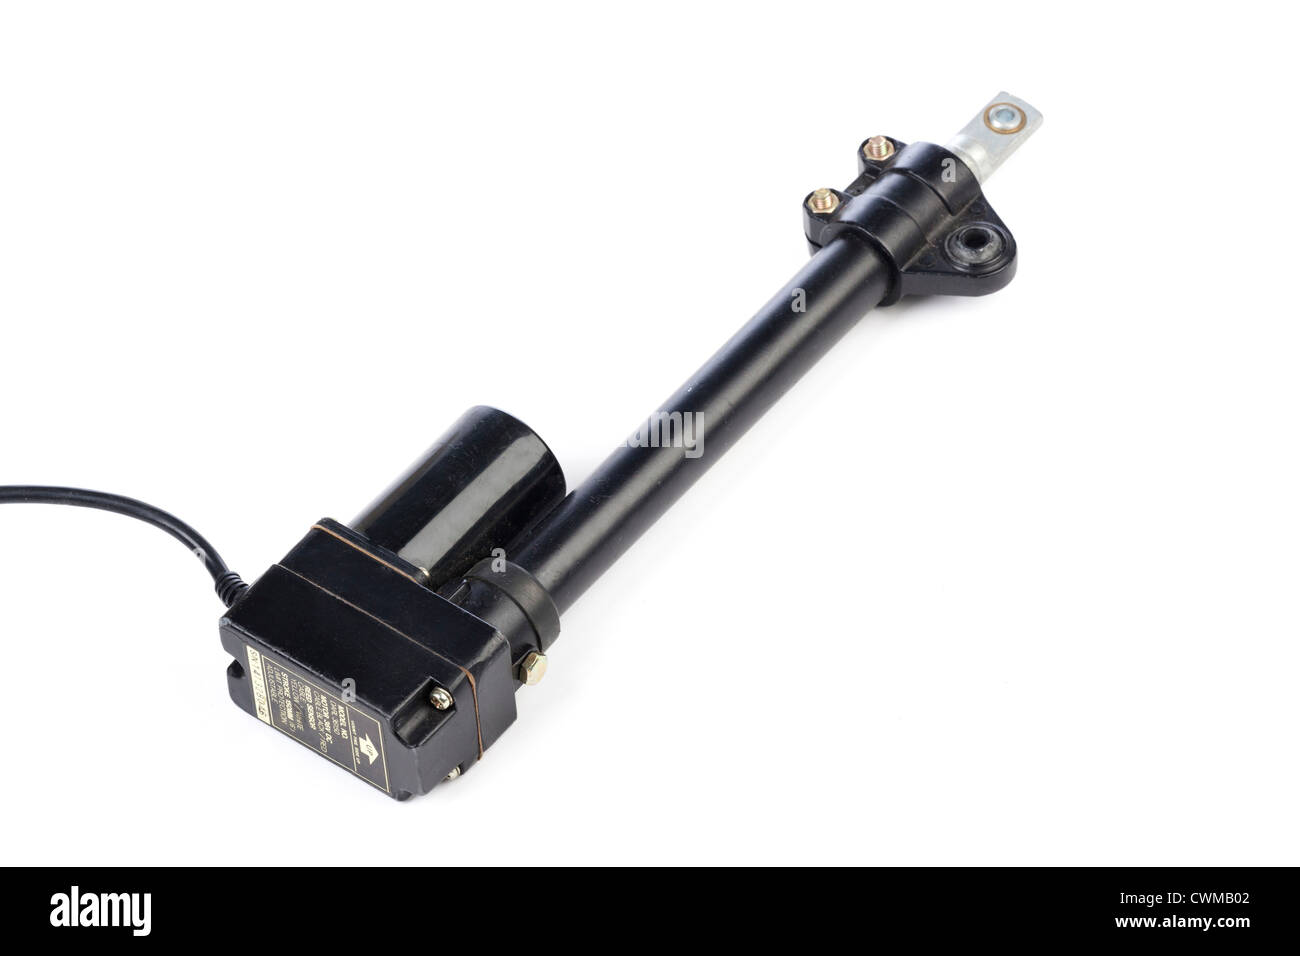 A linear actuator powered by DC motor Stock Photo